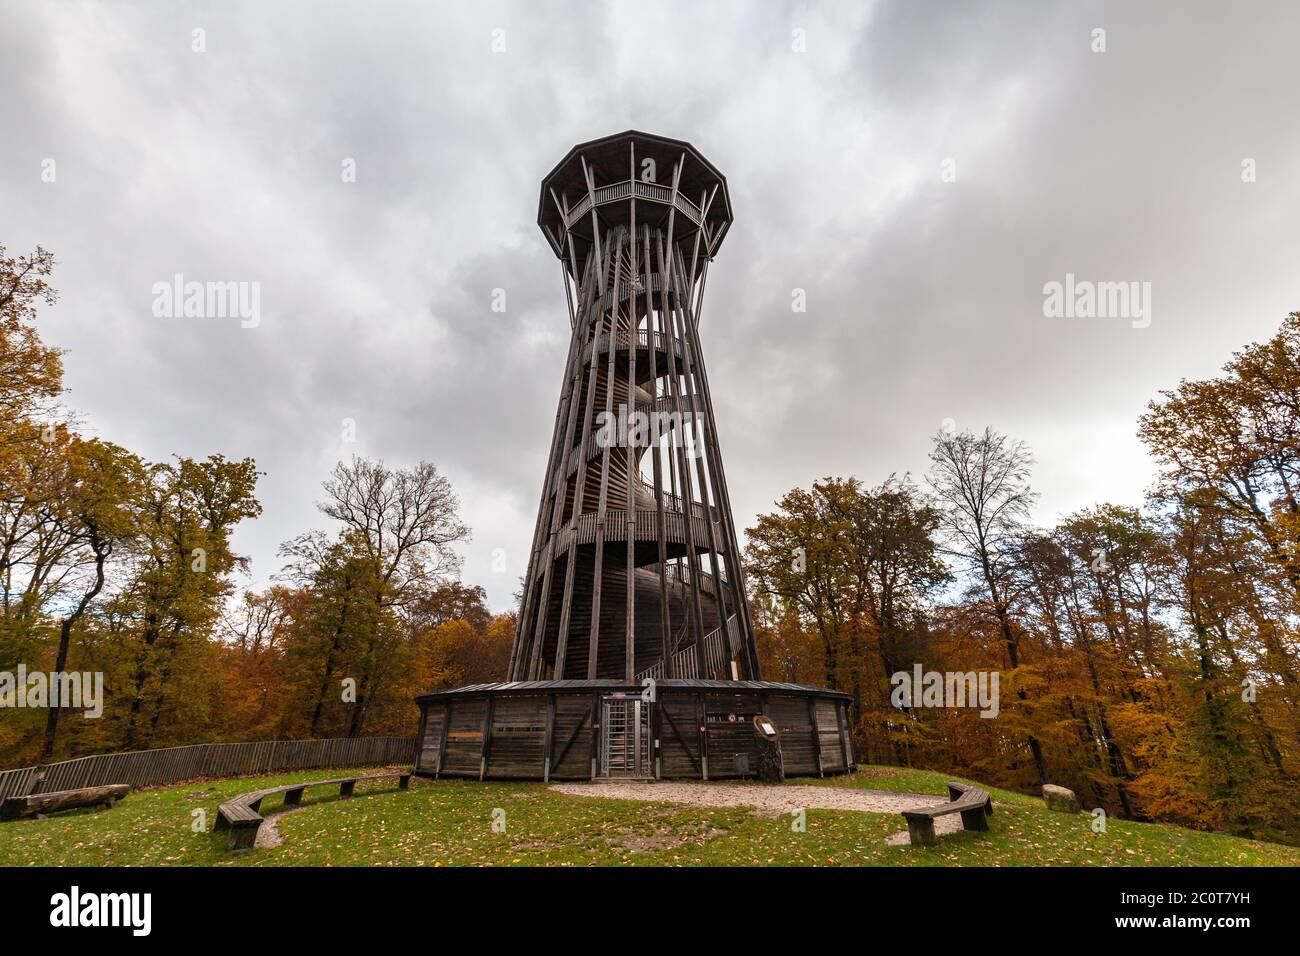 Close up view of Sauvabelin Tower (Tour de Sauvabelin) on cloudy autumn day, a wooden tower located in Sauvabelin forest with panoramic view of city, Stock Photo